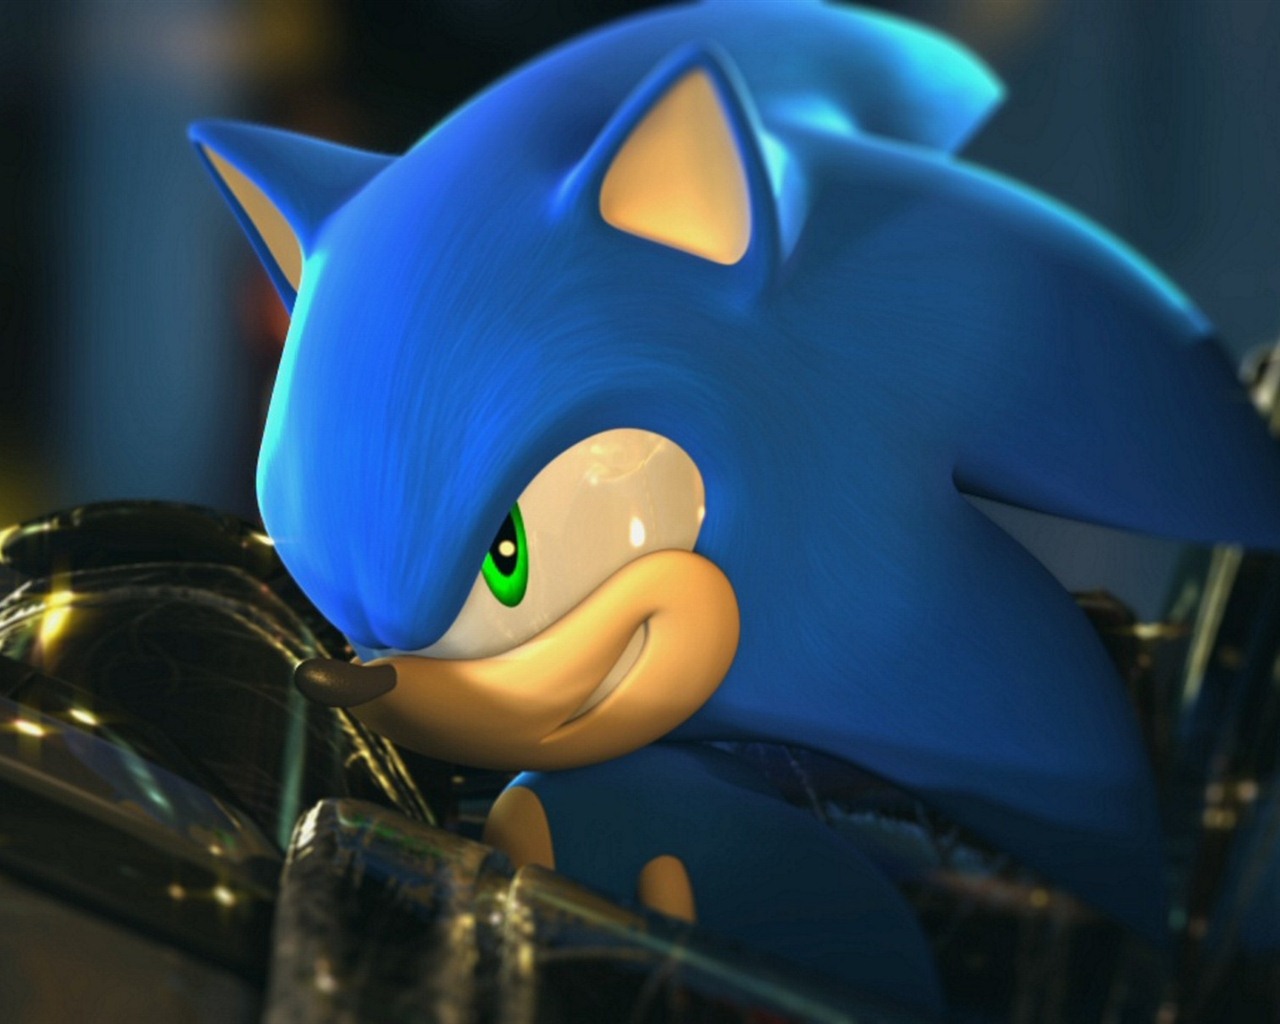 Sonic HD wallpapers #8 - 1280x1024